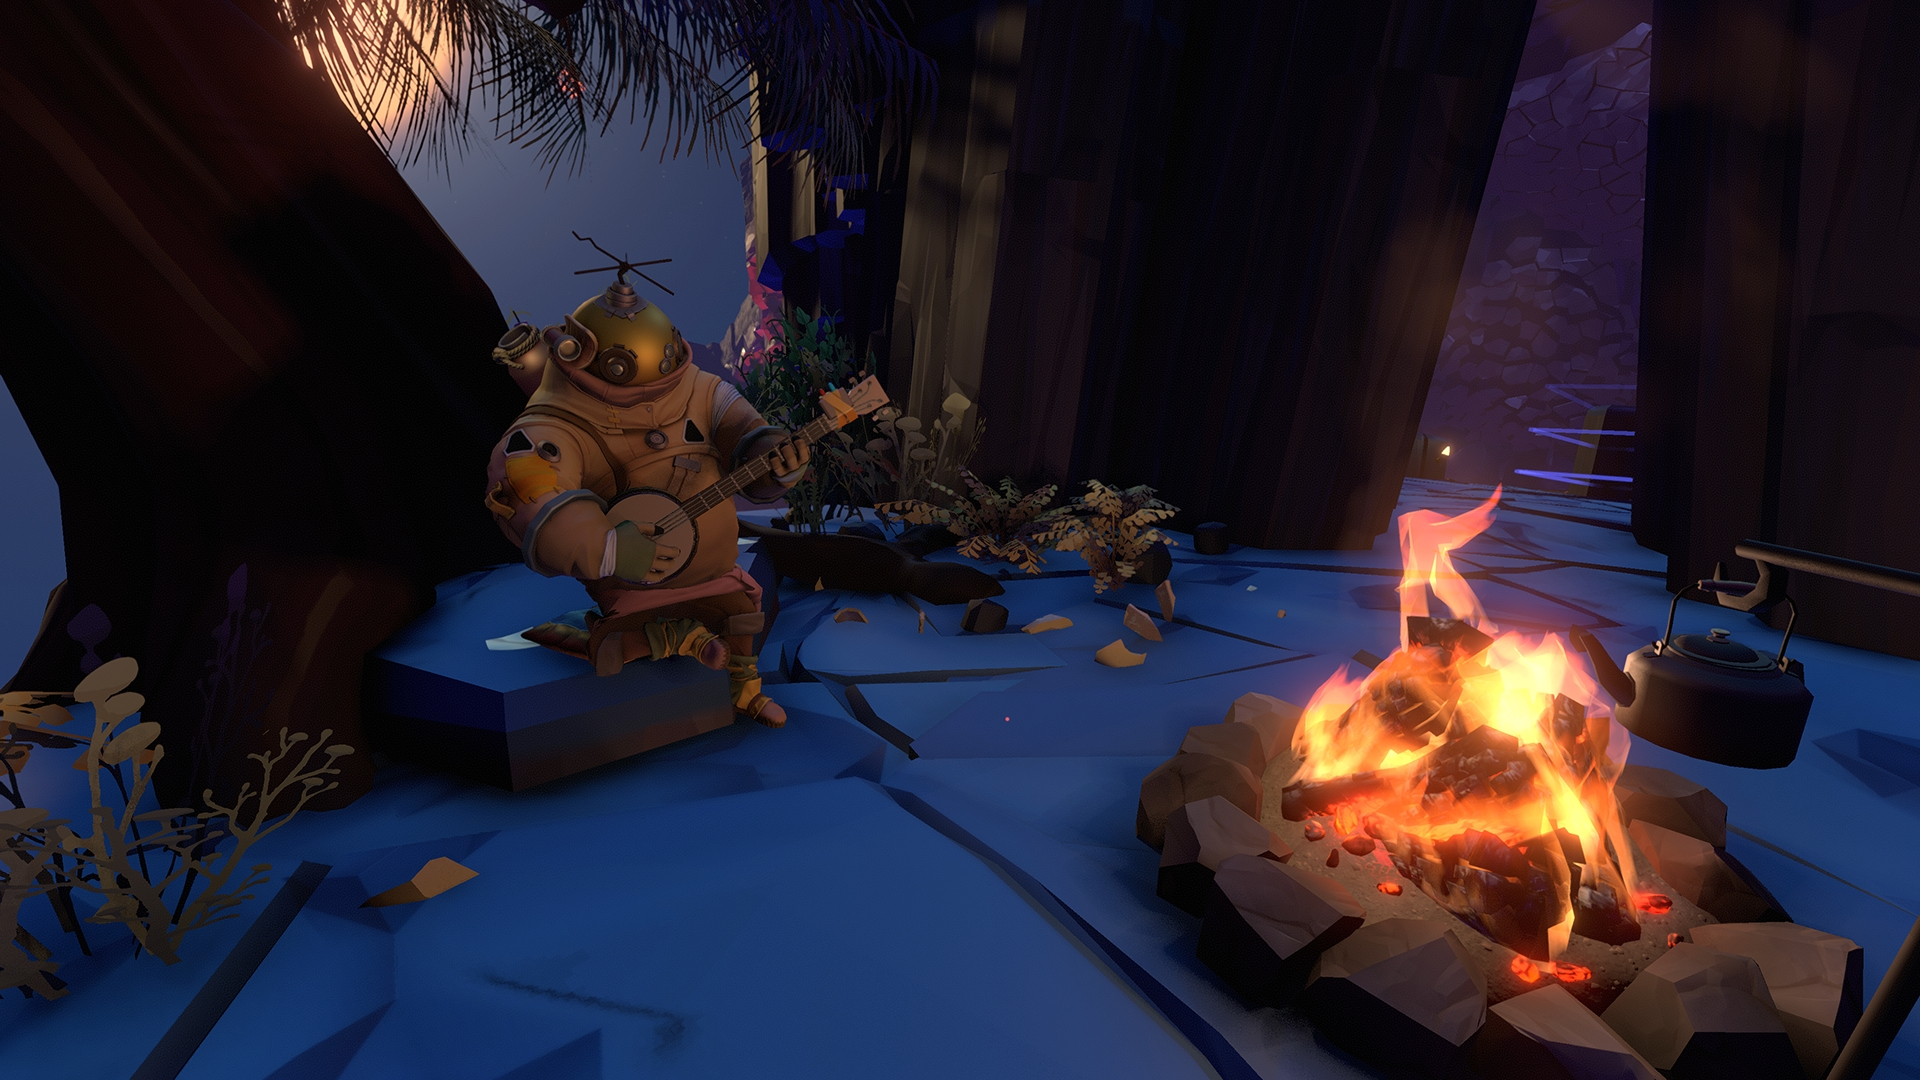 Outer Wilds, Echoes of the Eye DLC, and the Archaelogist Edition